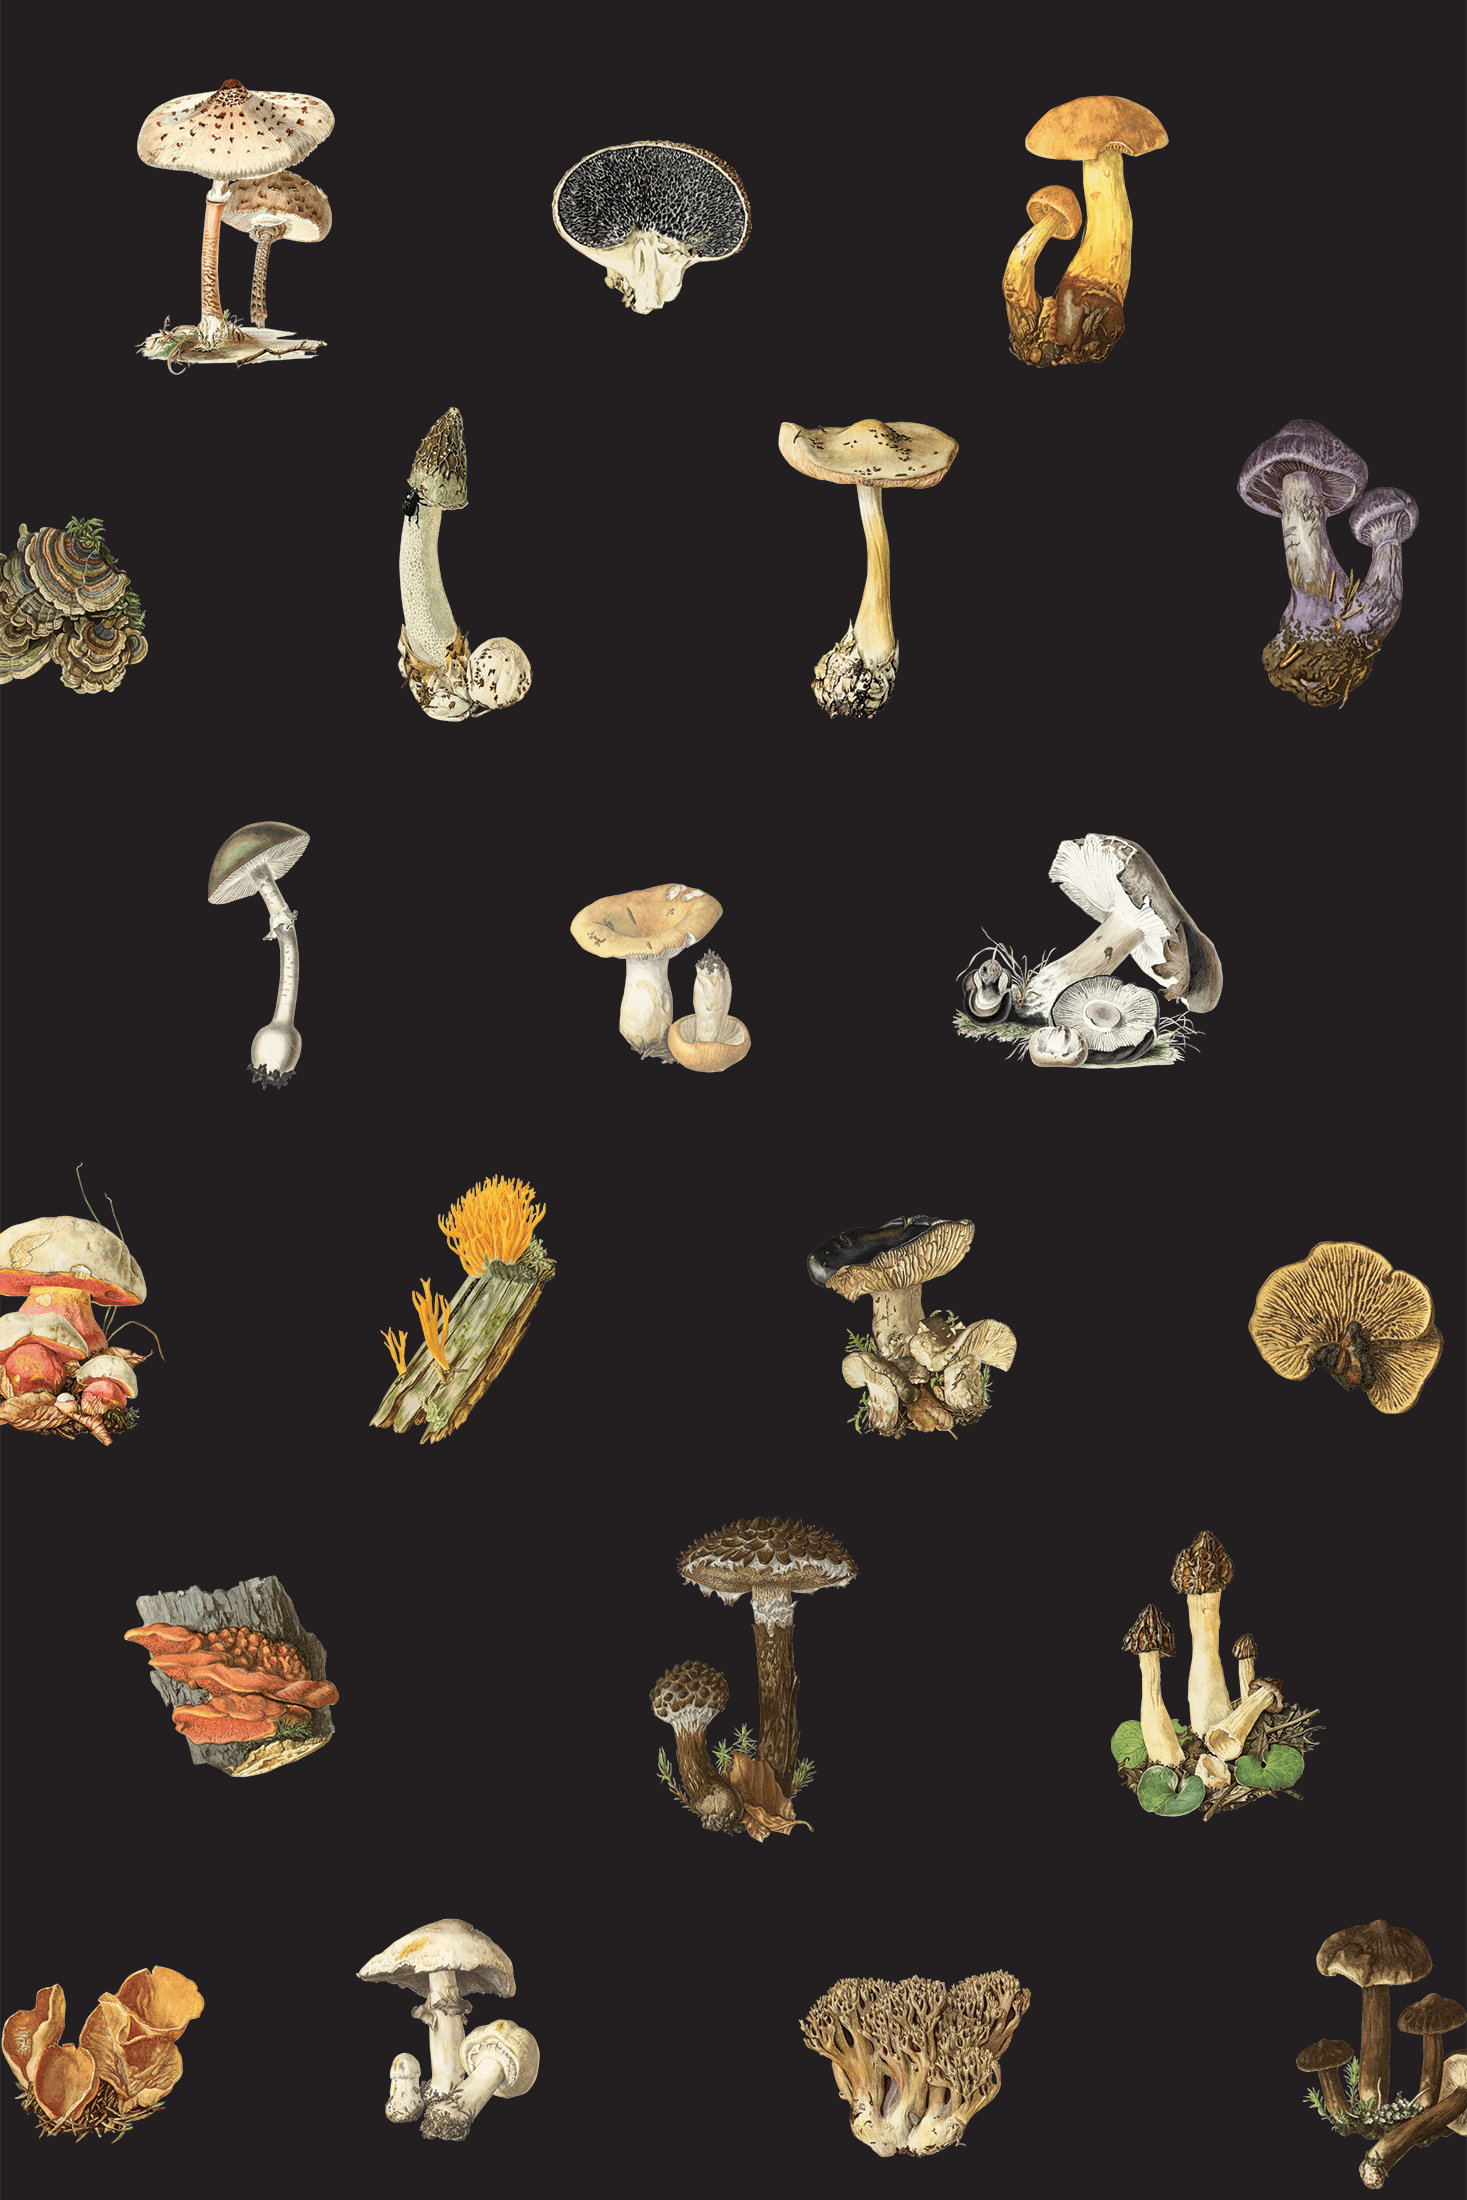 A pattern of different types of mushrooms on a black background - Magic